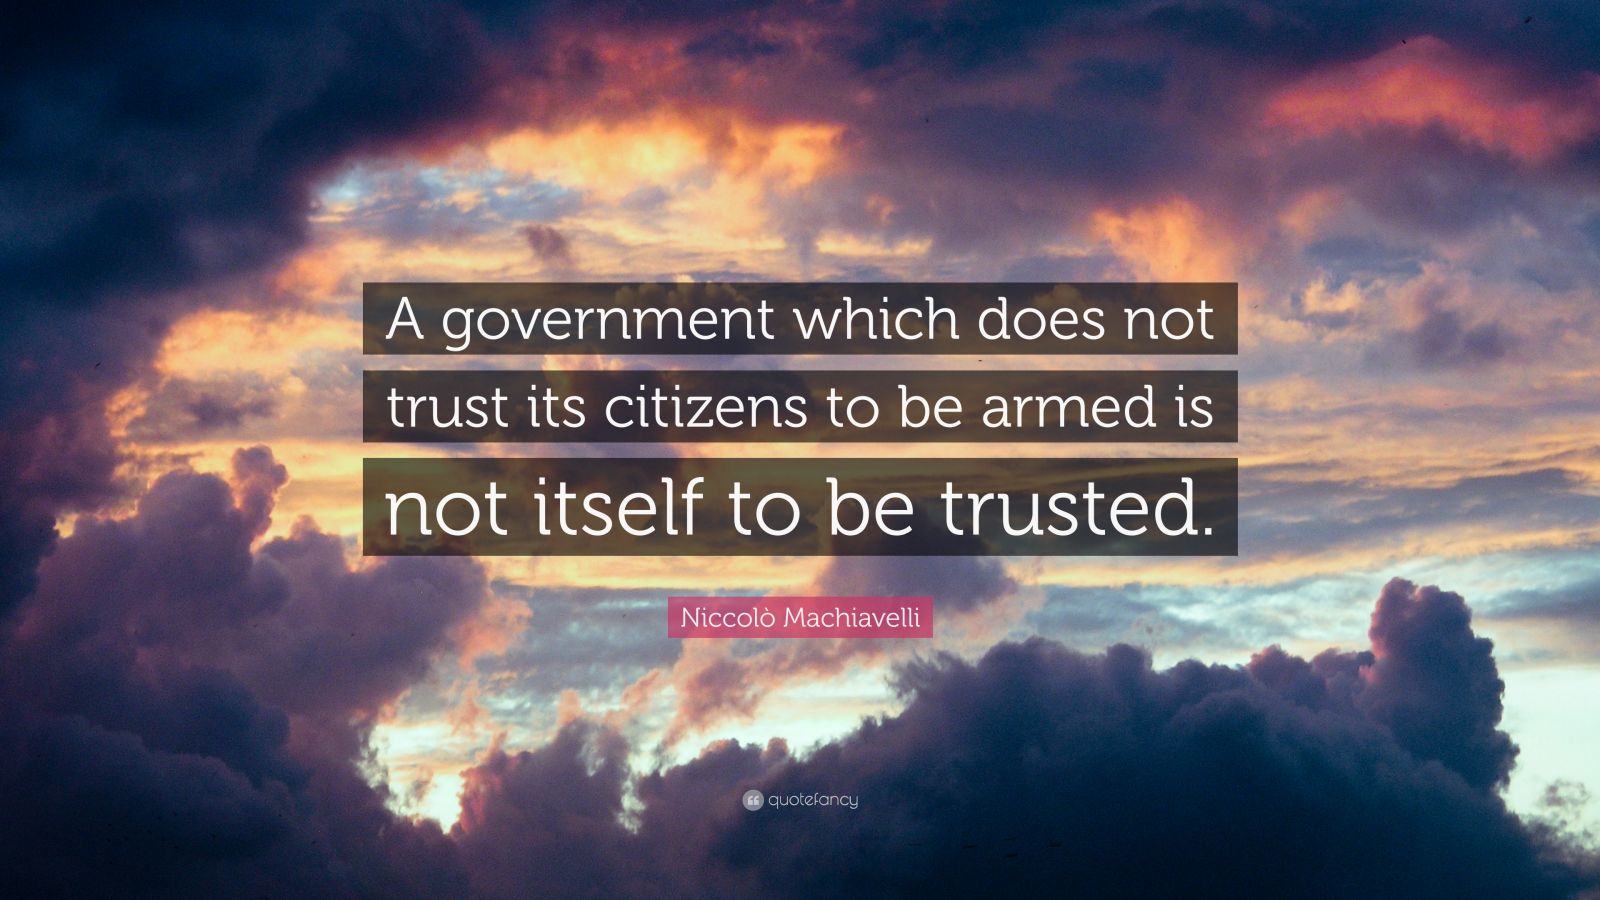 Niccolò Machiavelli Quote: “A government which does not trust its